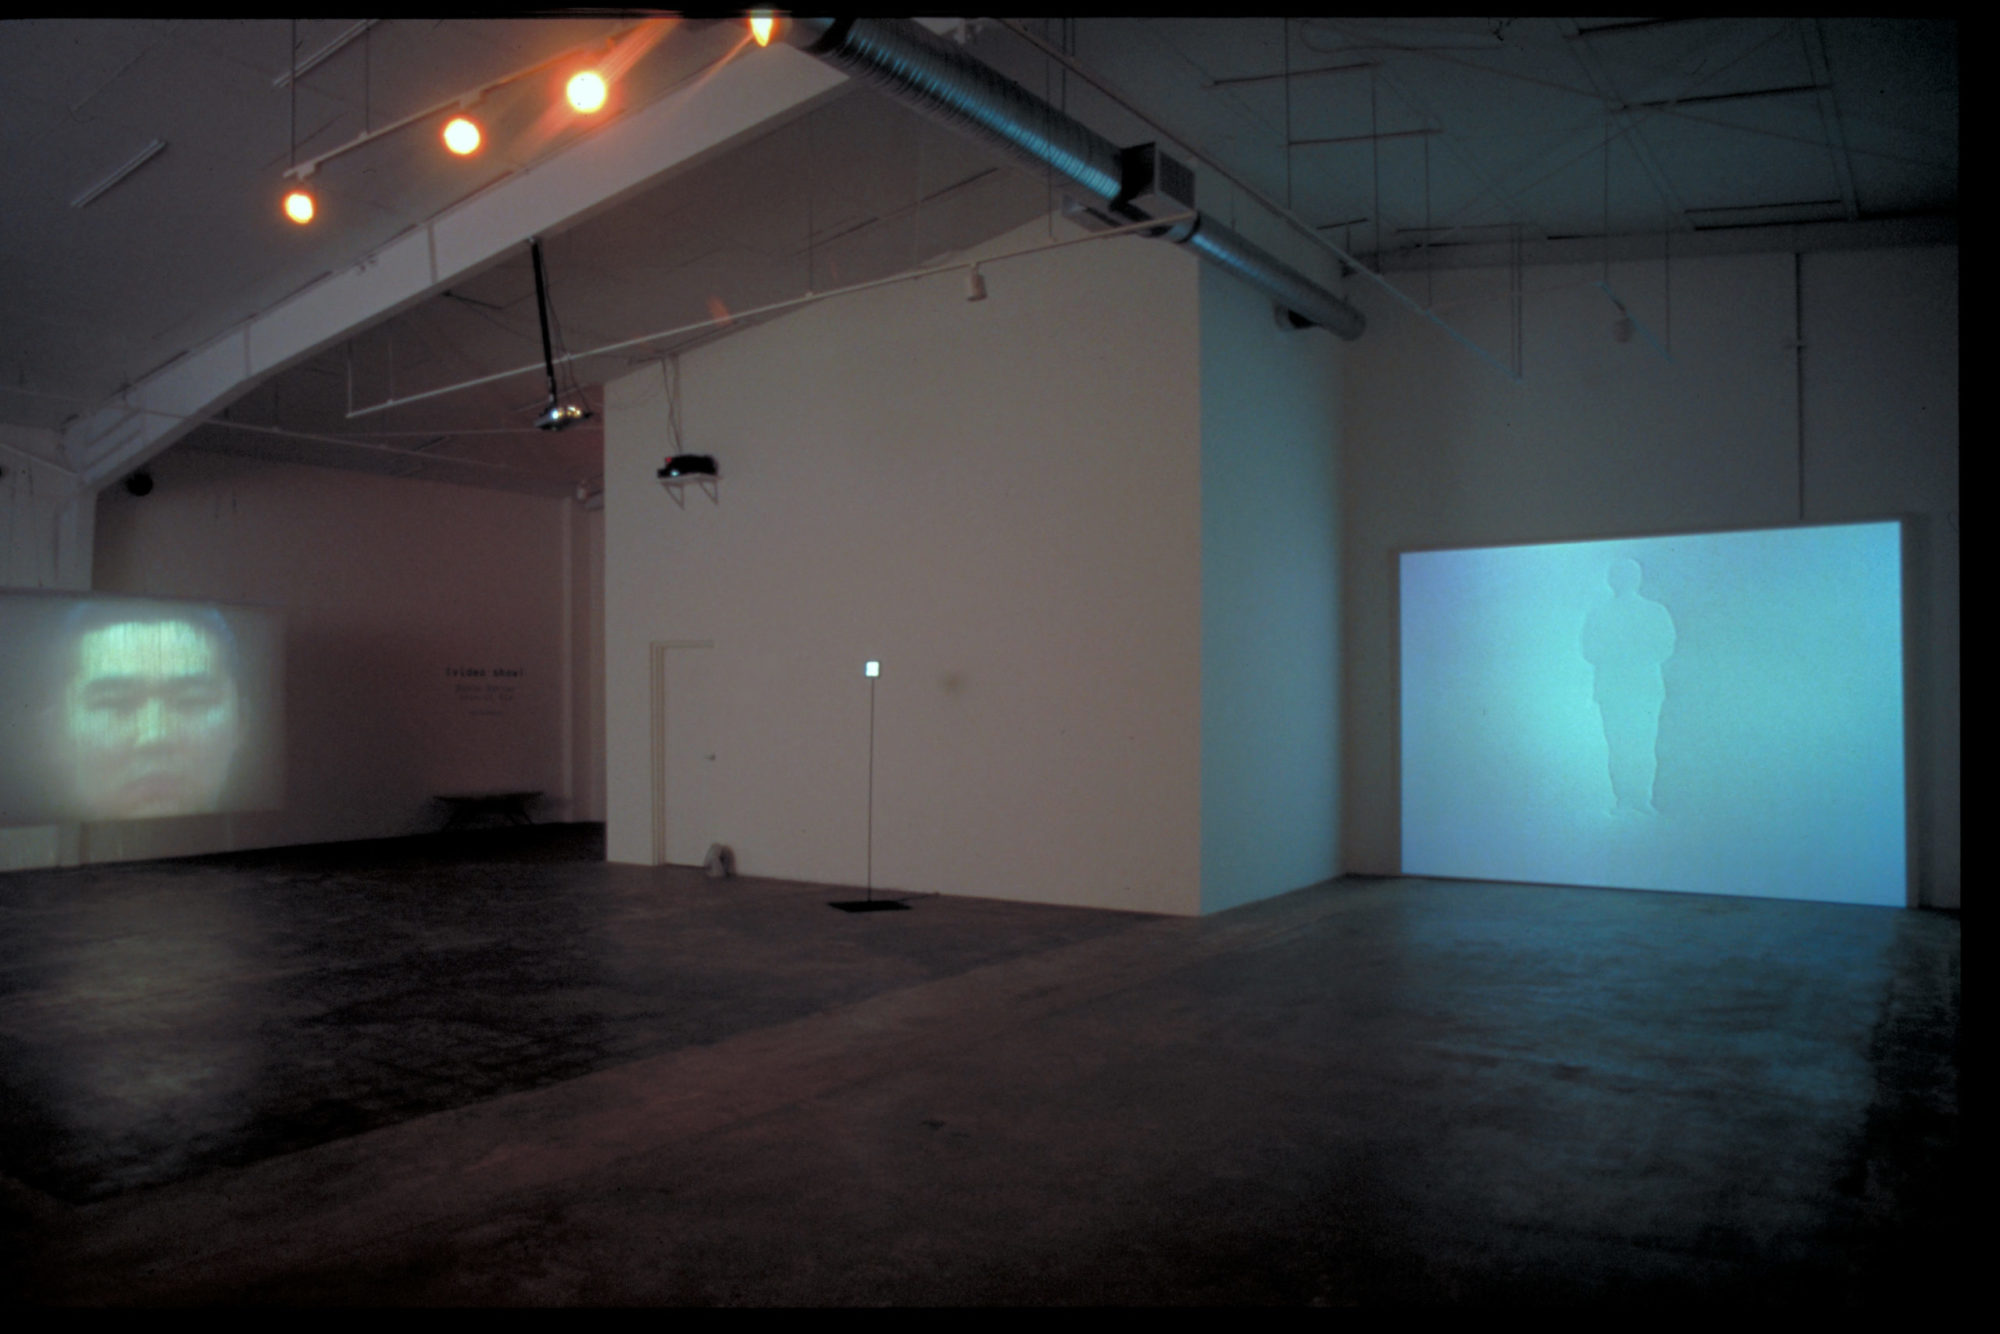 A photograph of an instillation view with white walls and a dark floor. Two images, one of a silhouette and another of a face, are projected on the walls.